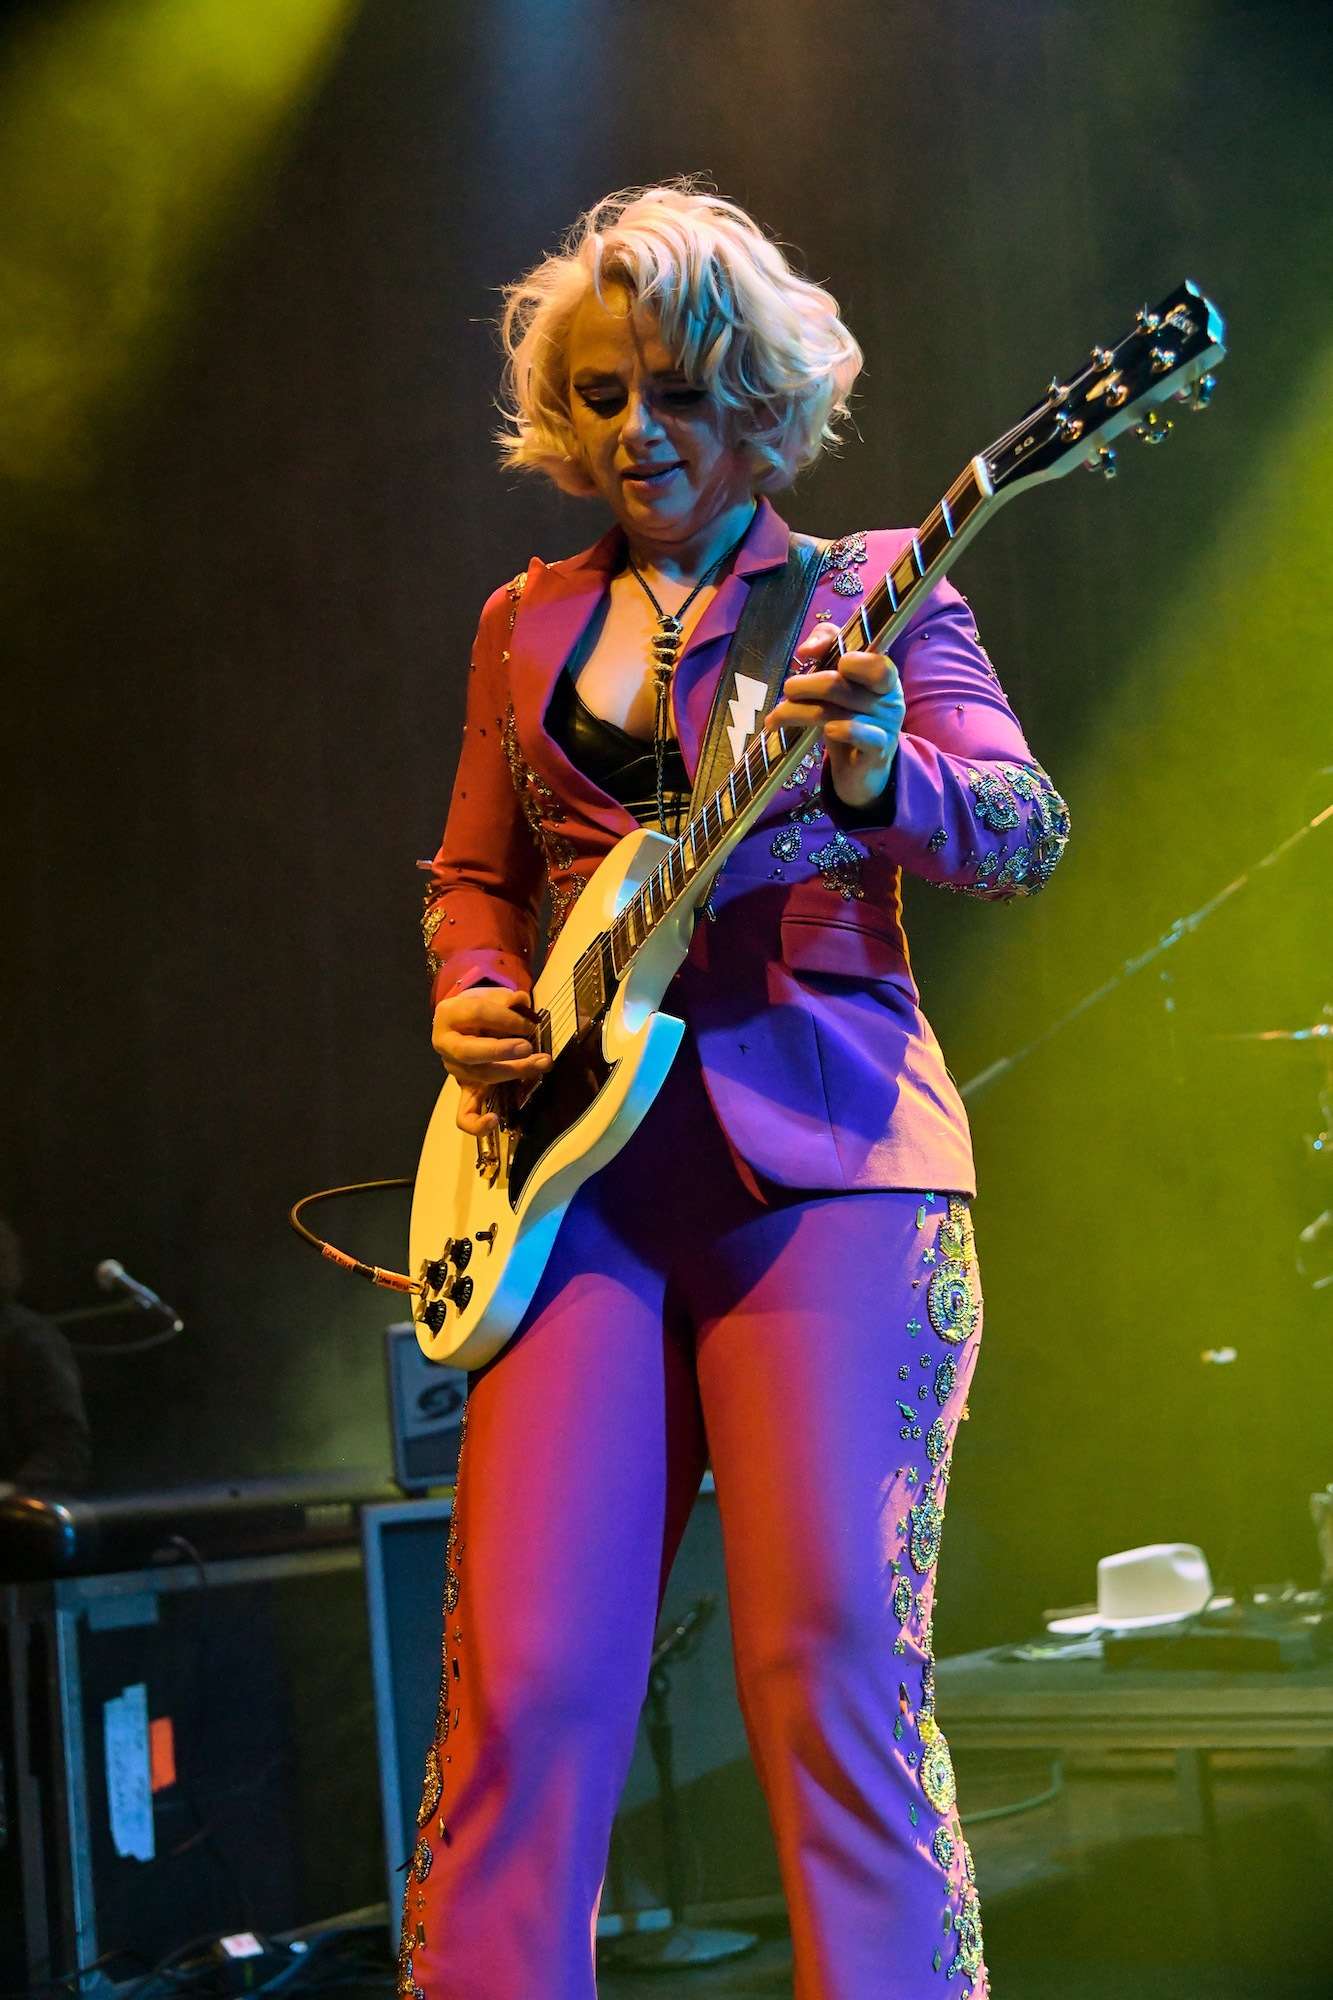 Samantha Fish Live at Park West [GALLERY] 5